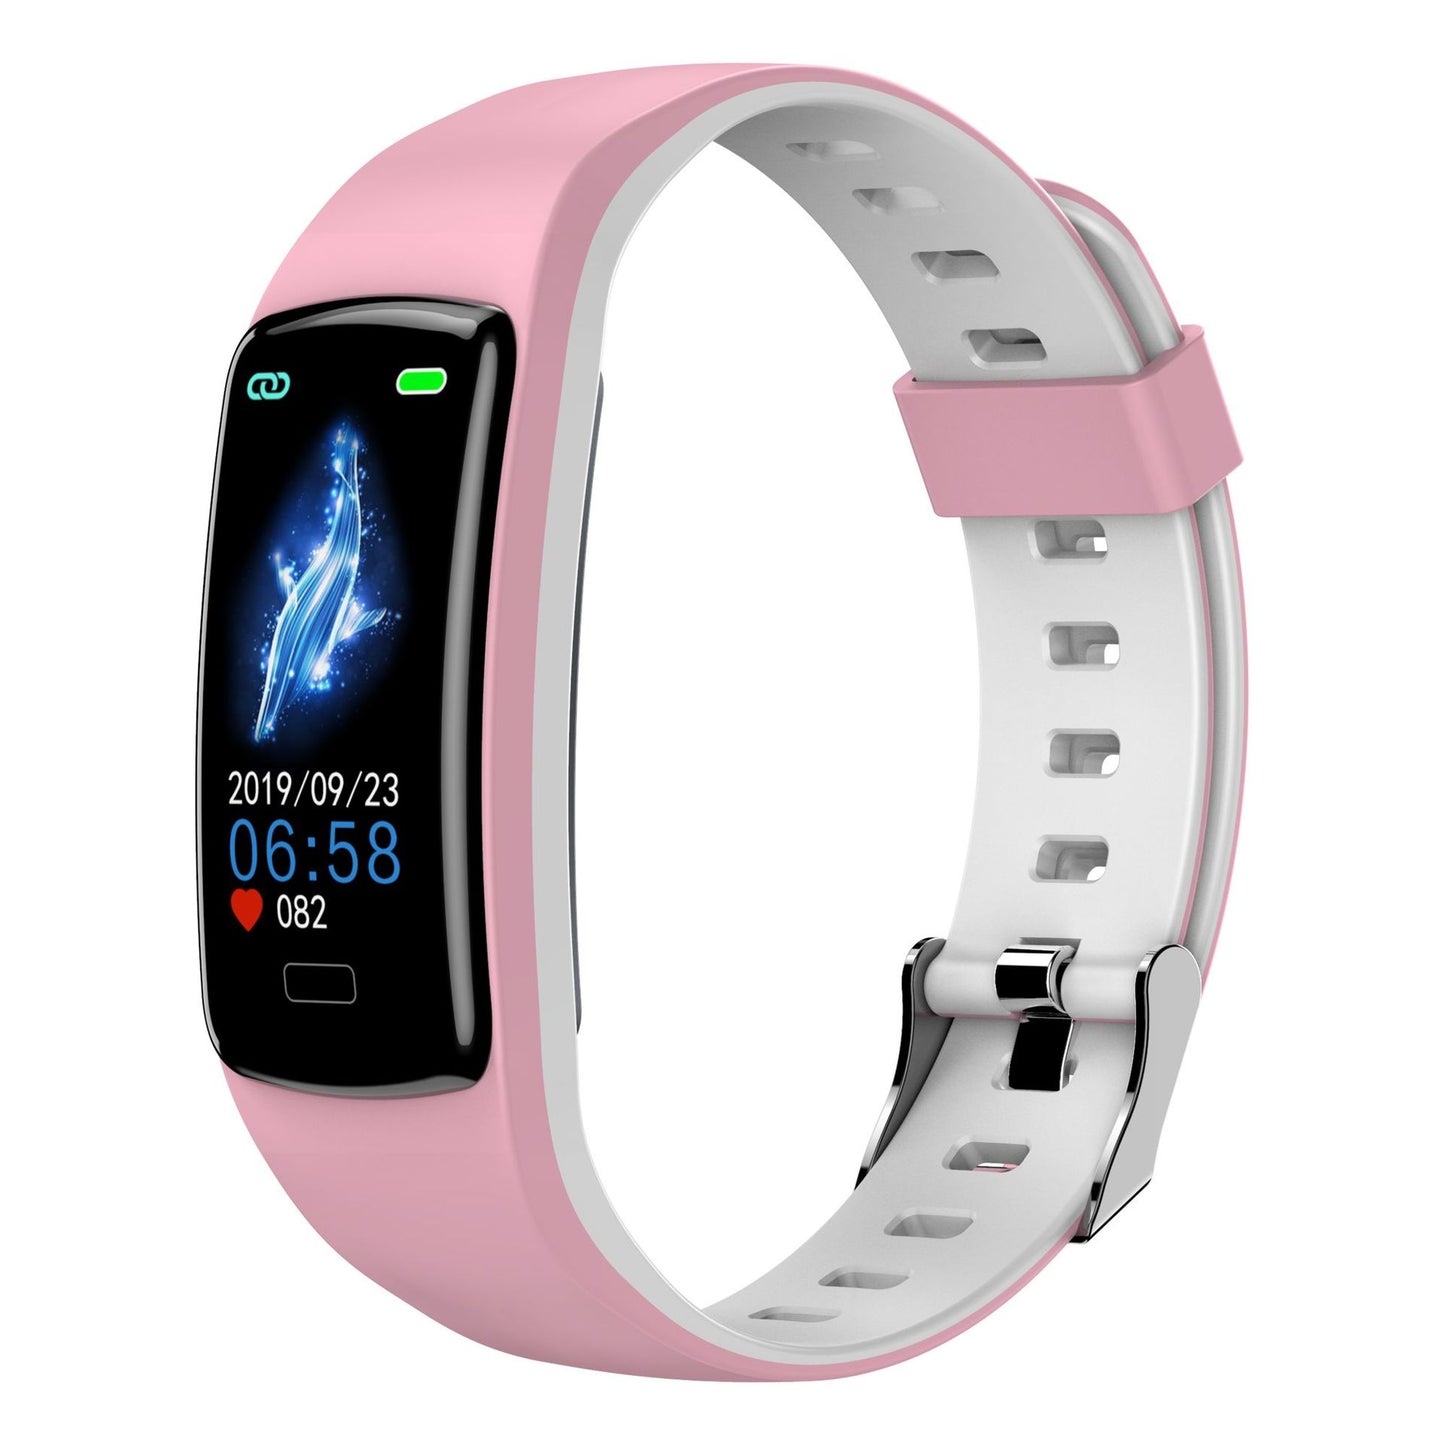 IP68 Waterproof Smart Bracelet With Large Heart Rate Display And Multi-sport Mode